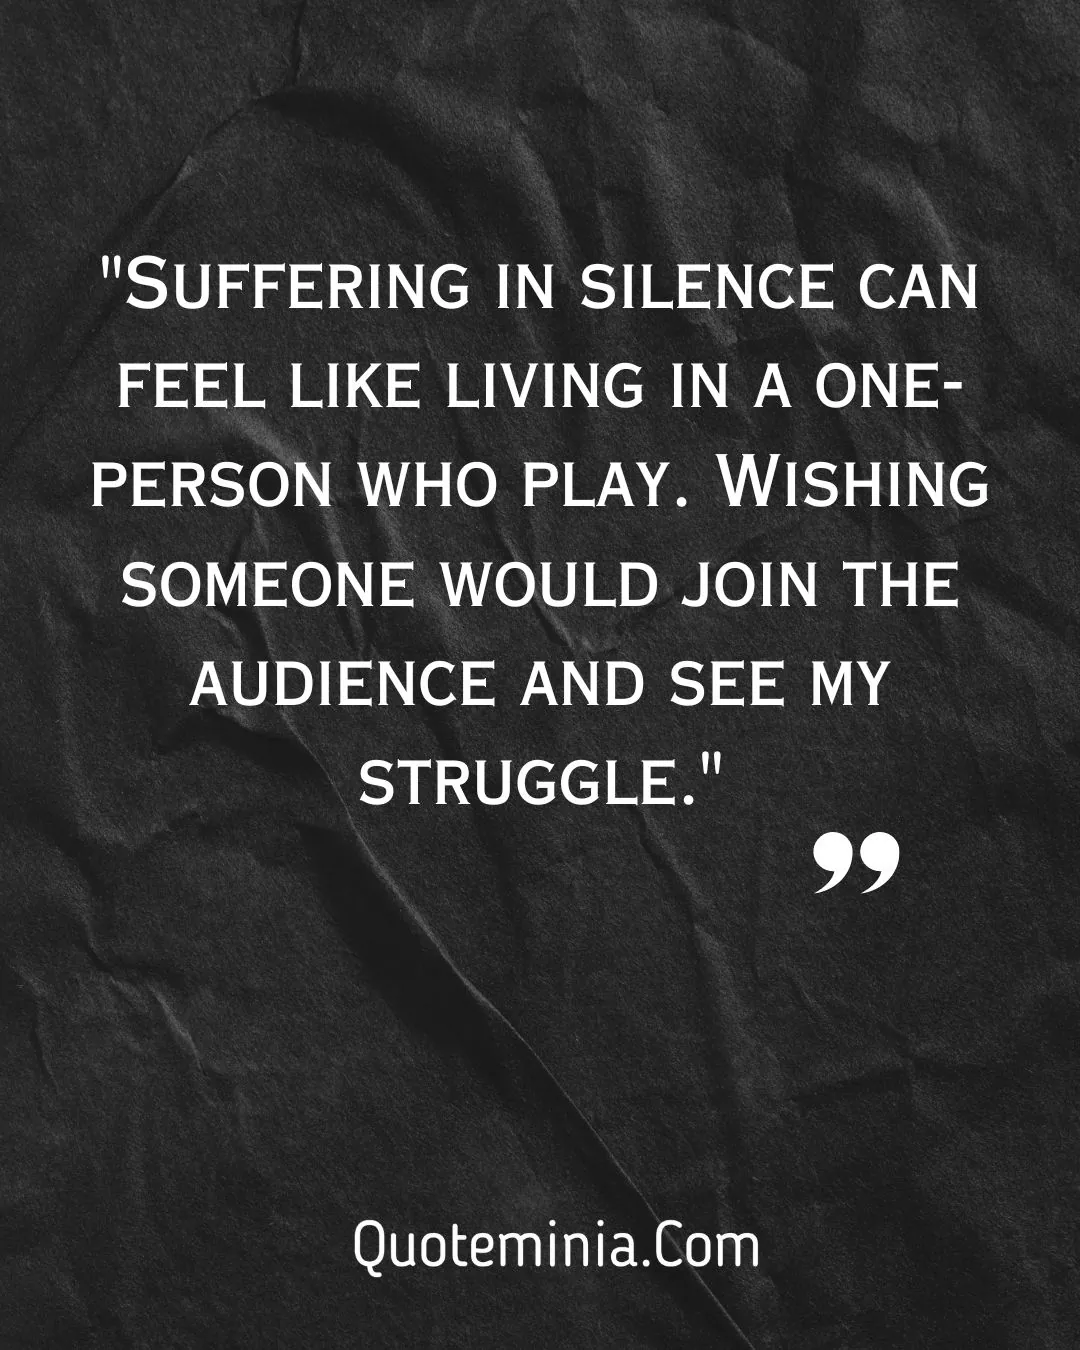 Suffer in Silence Quotes Image 1